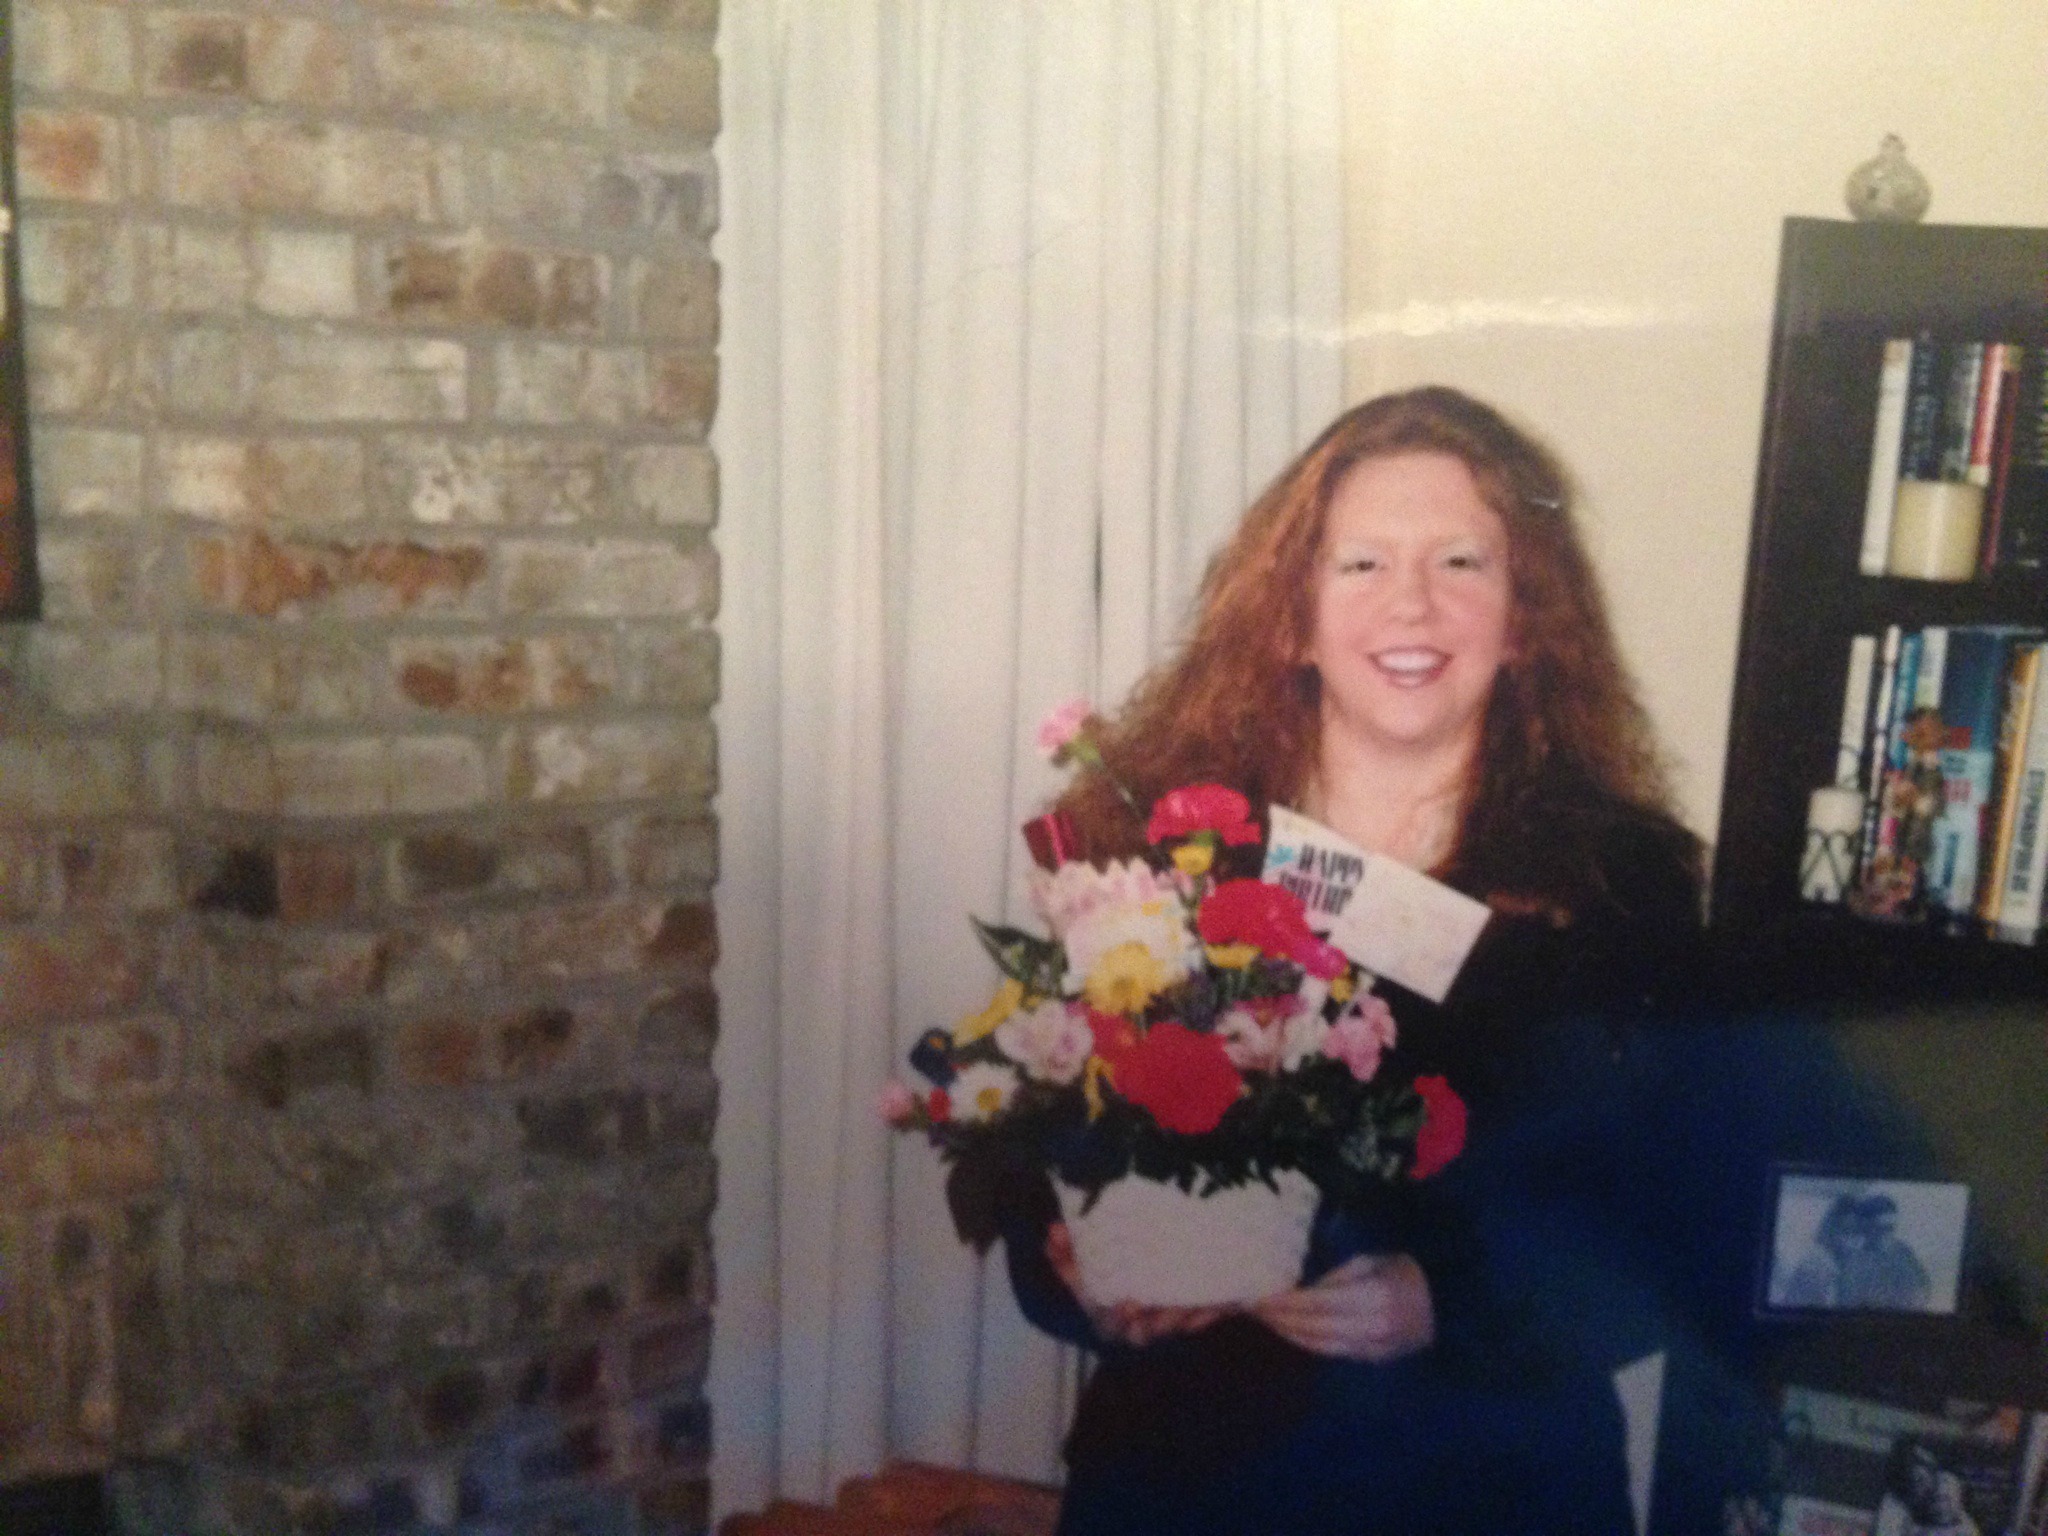 A picture of an overweight woman holding flowers.